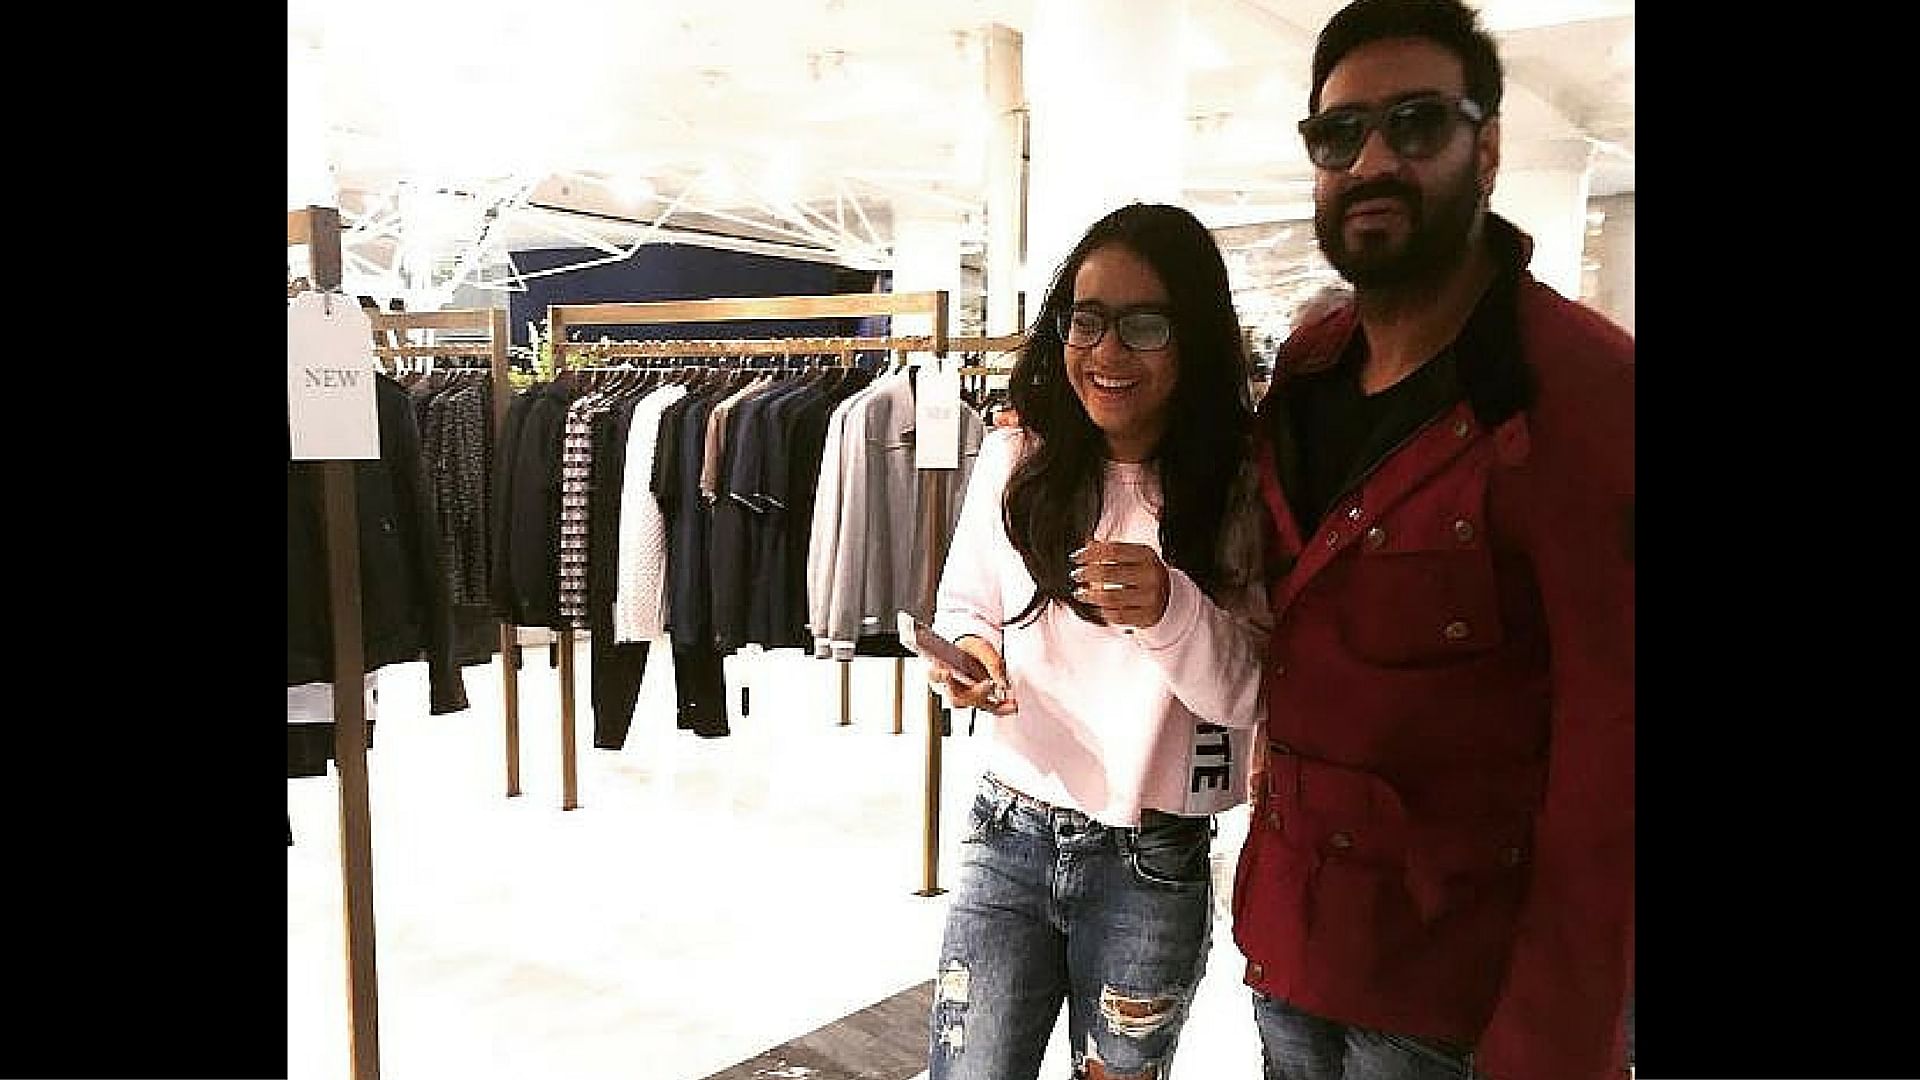 Ajay Devgn with his daughter Nysa. (Photo Courtesy: Instagram/<a href="https://www.instagram.com/p/BHzc75egYOh/">Ajay Devgn</a>)